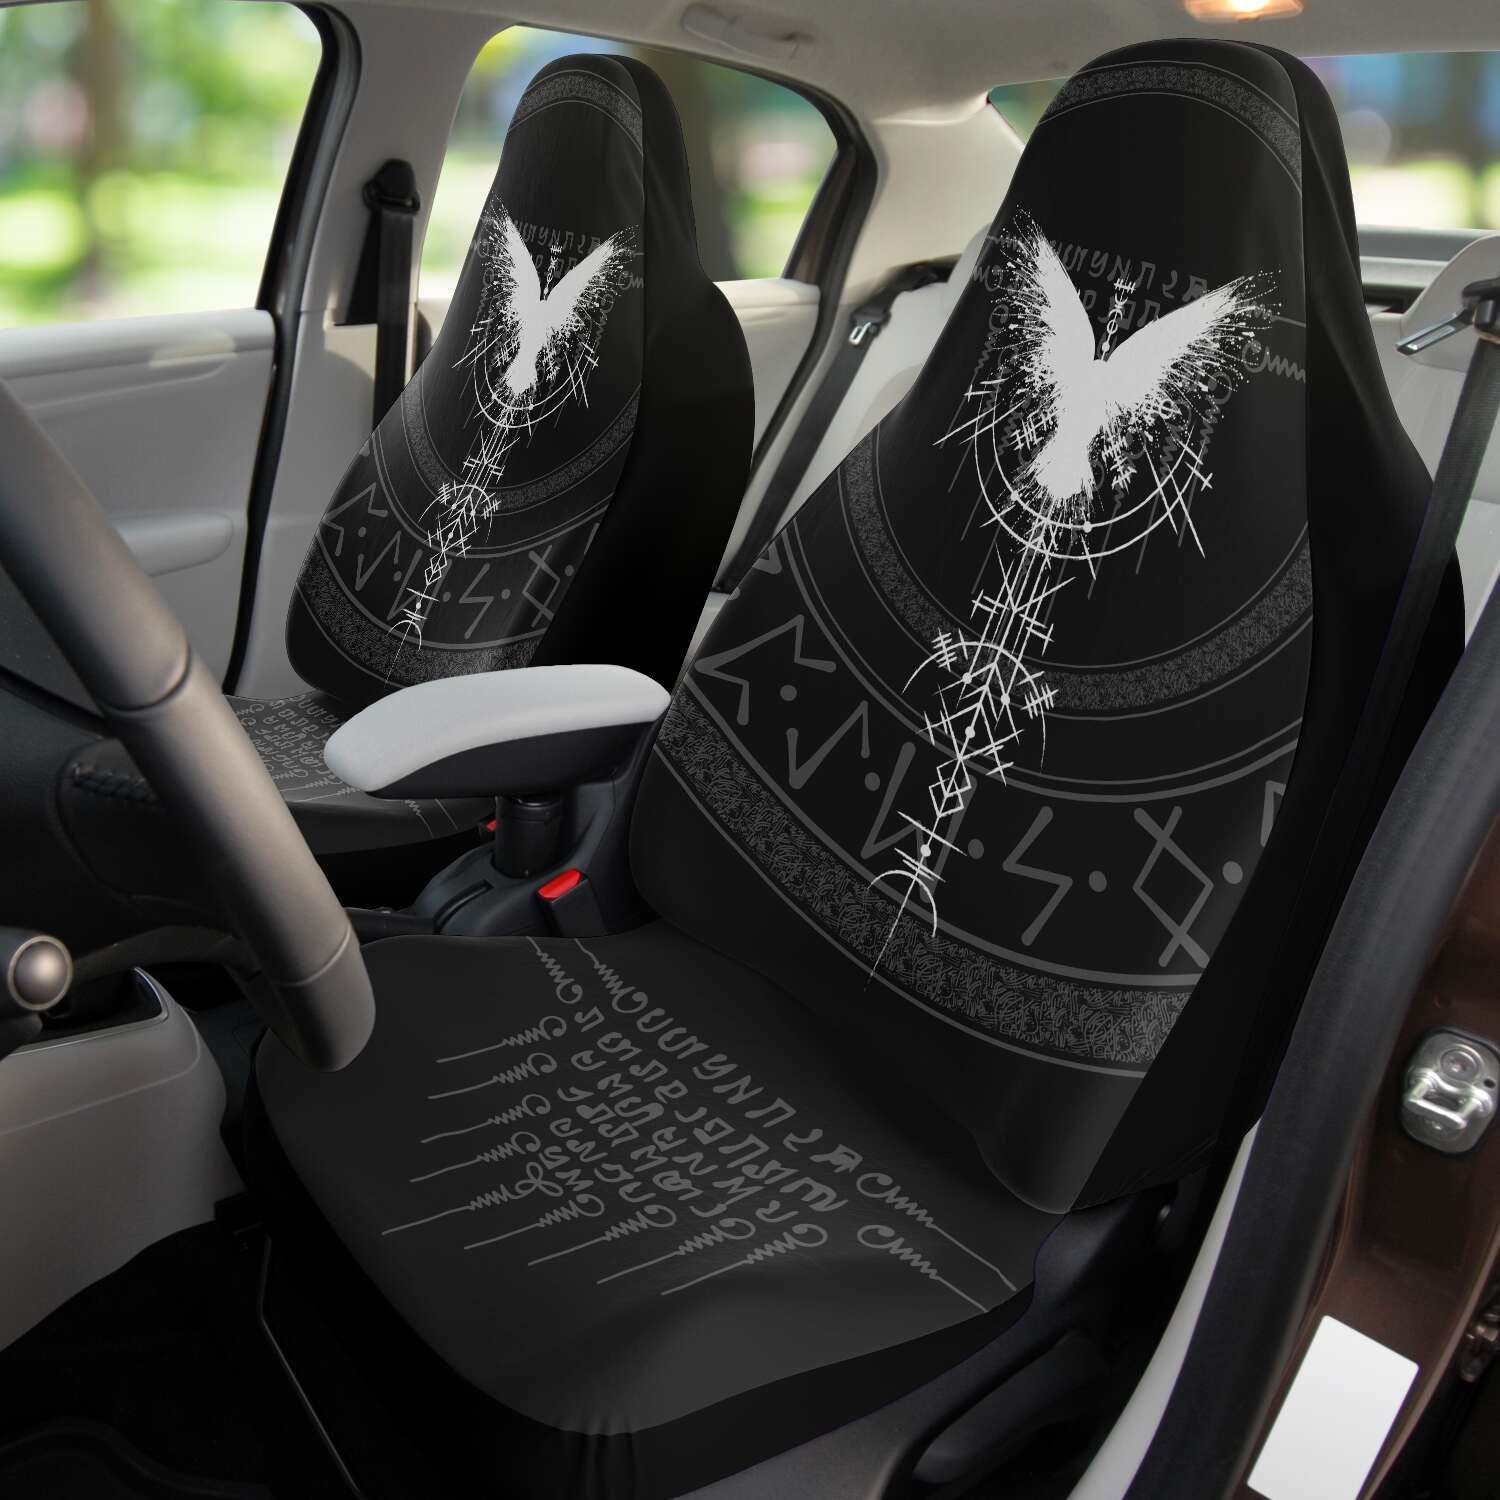 DIY Car Headrest Covers \\ With a Witchy Twist 